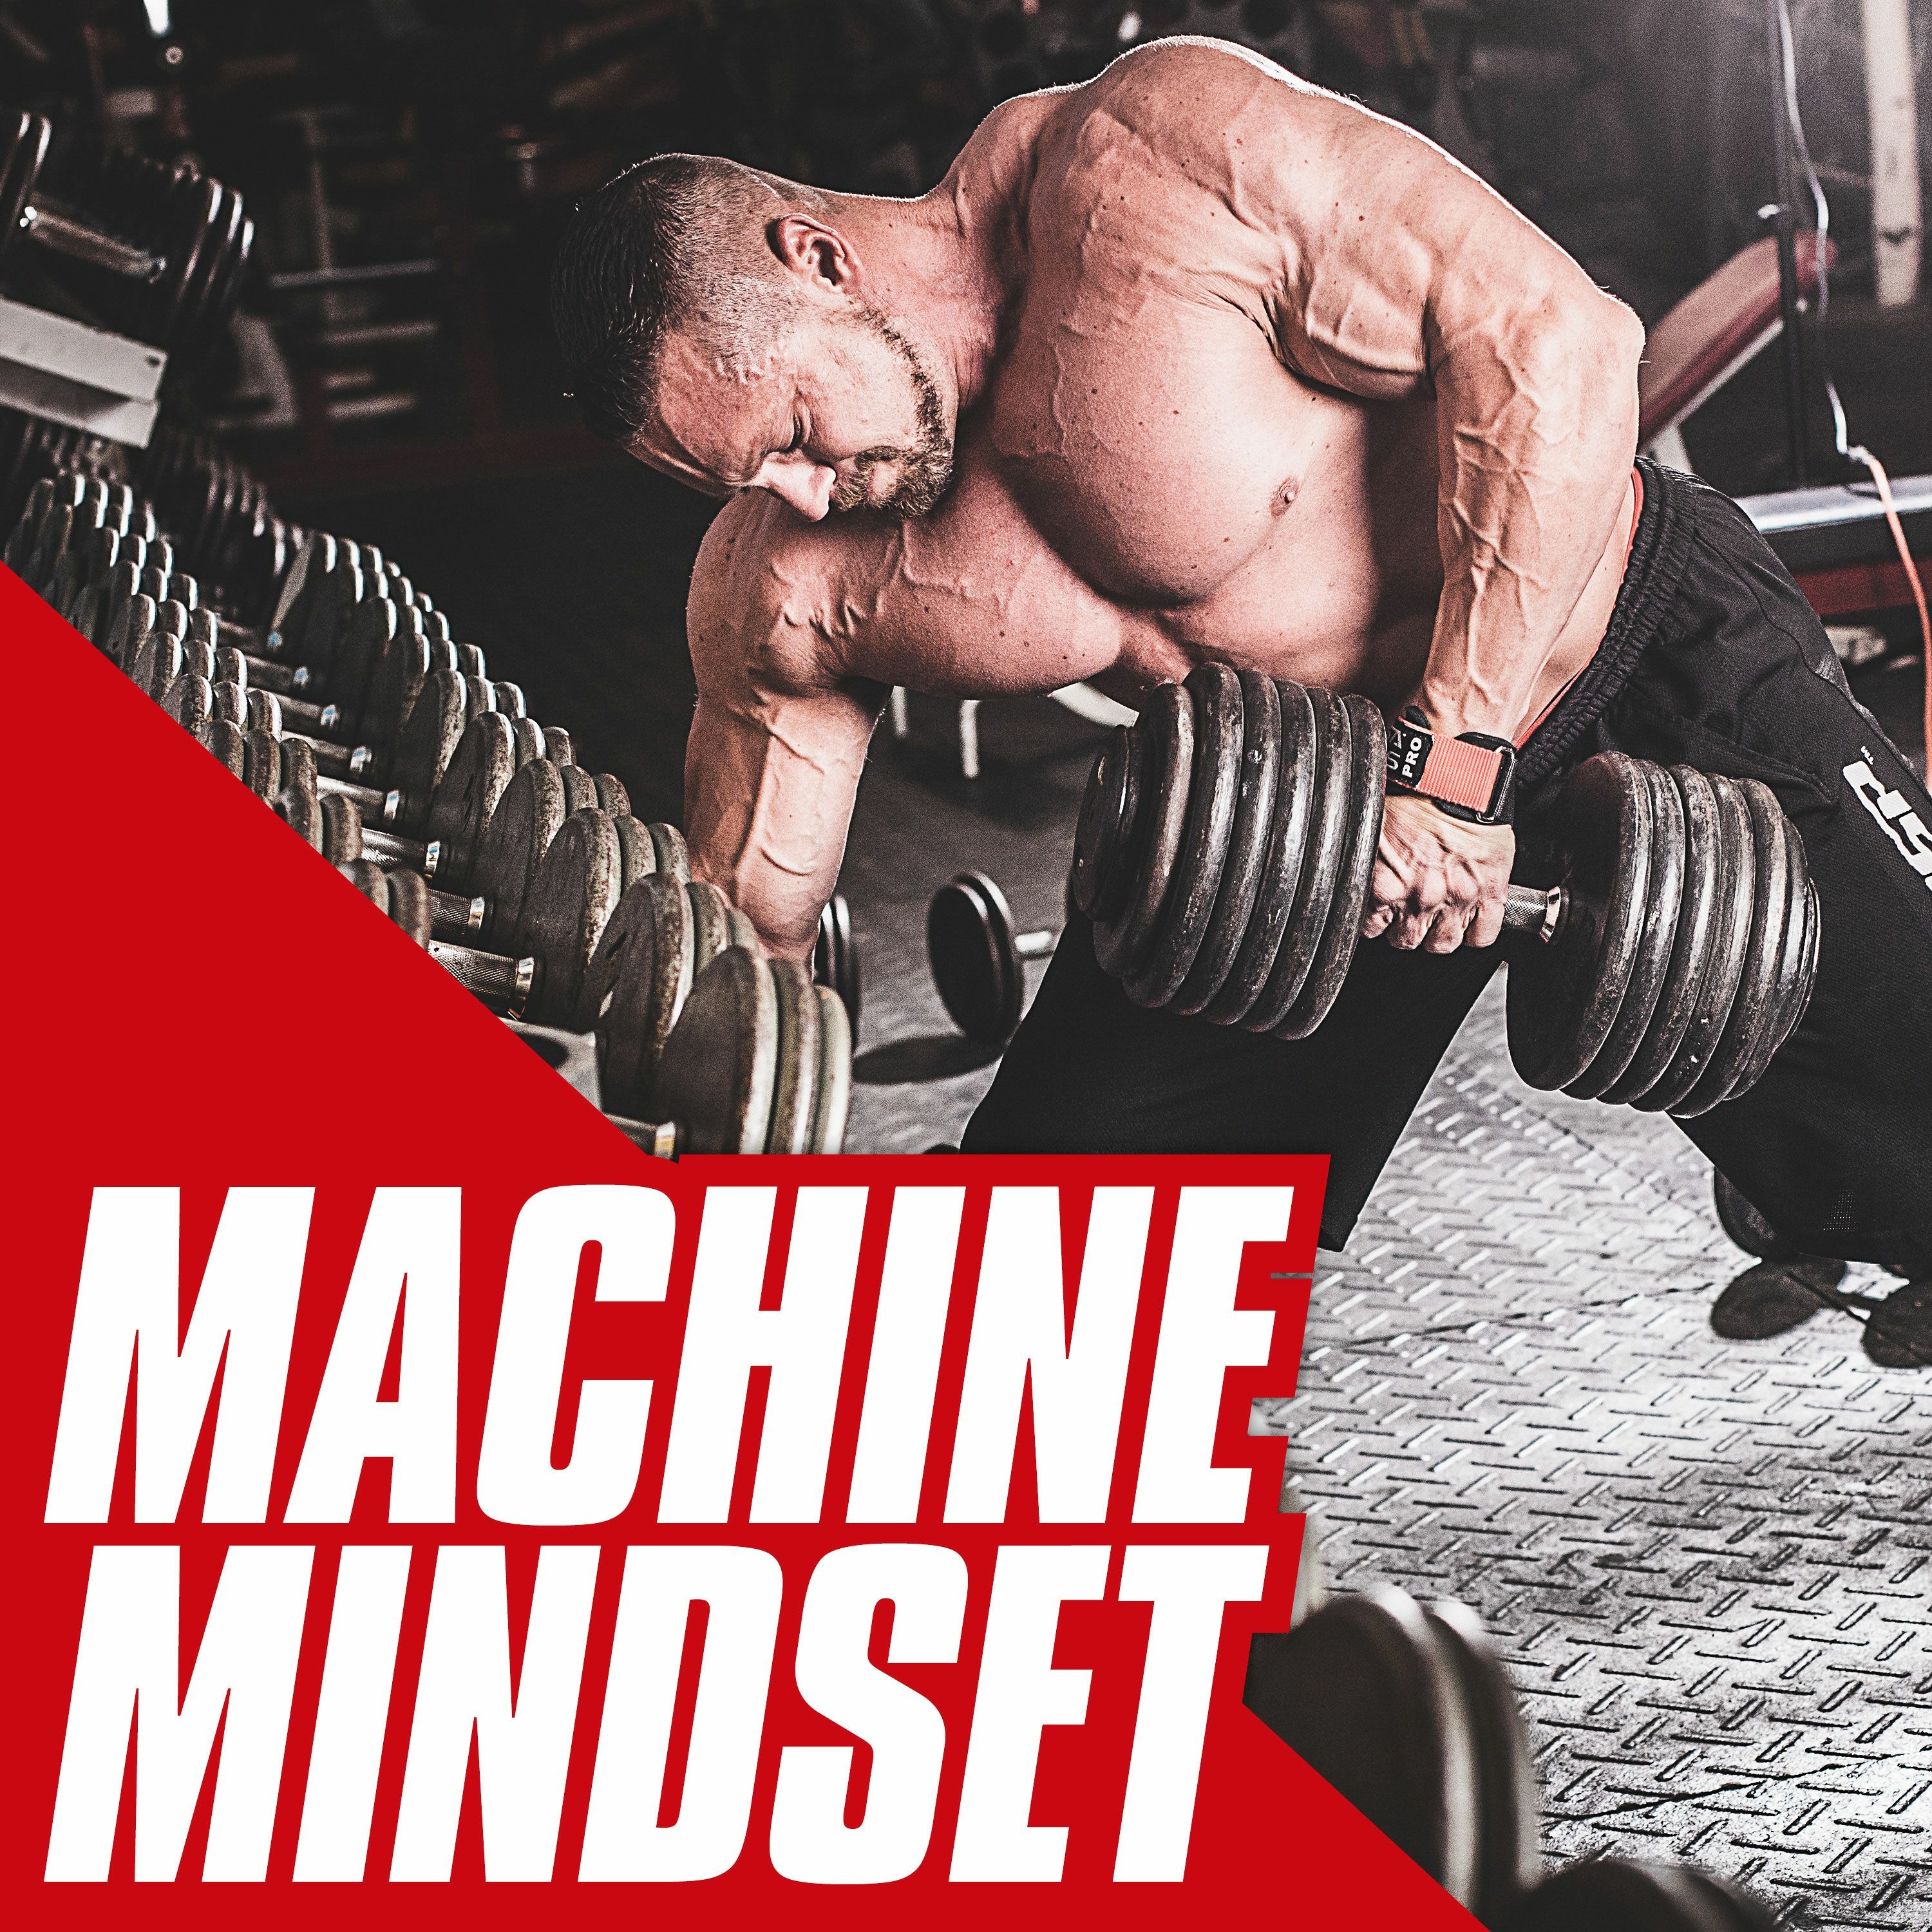 Machine Mindset Podcast 3 | Alcohol is More Dangerous than Ste*oids!